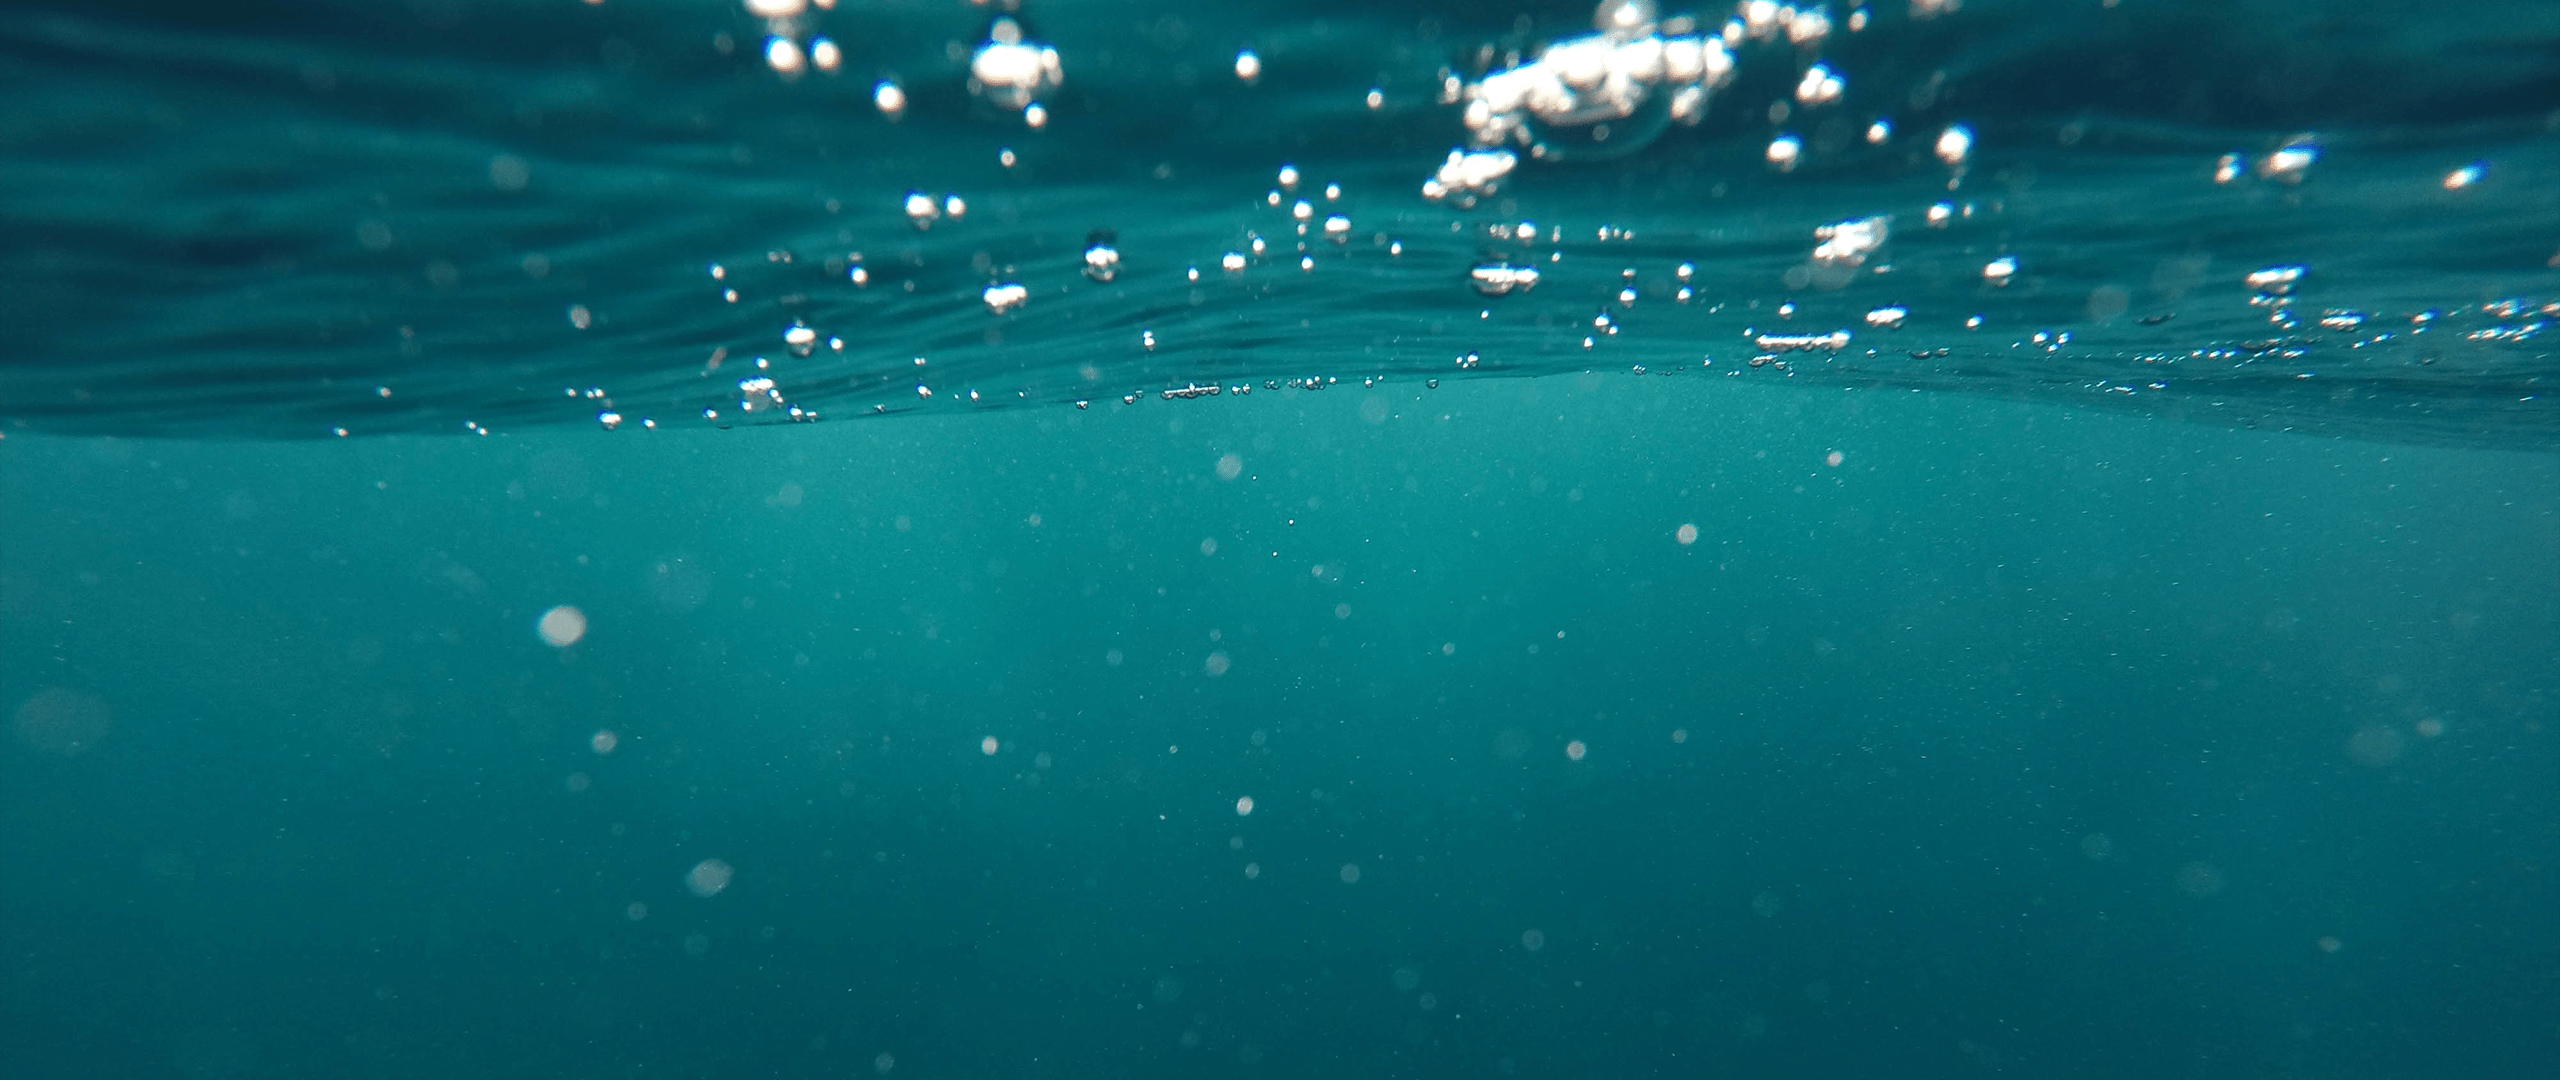 A person is swimming under water - Underwater